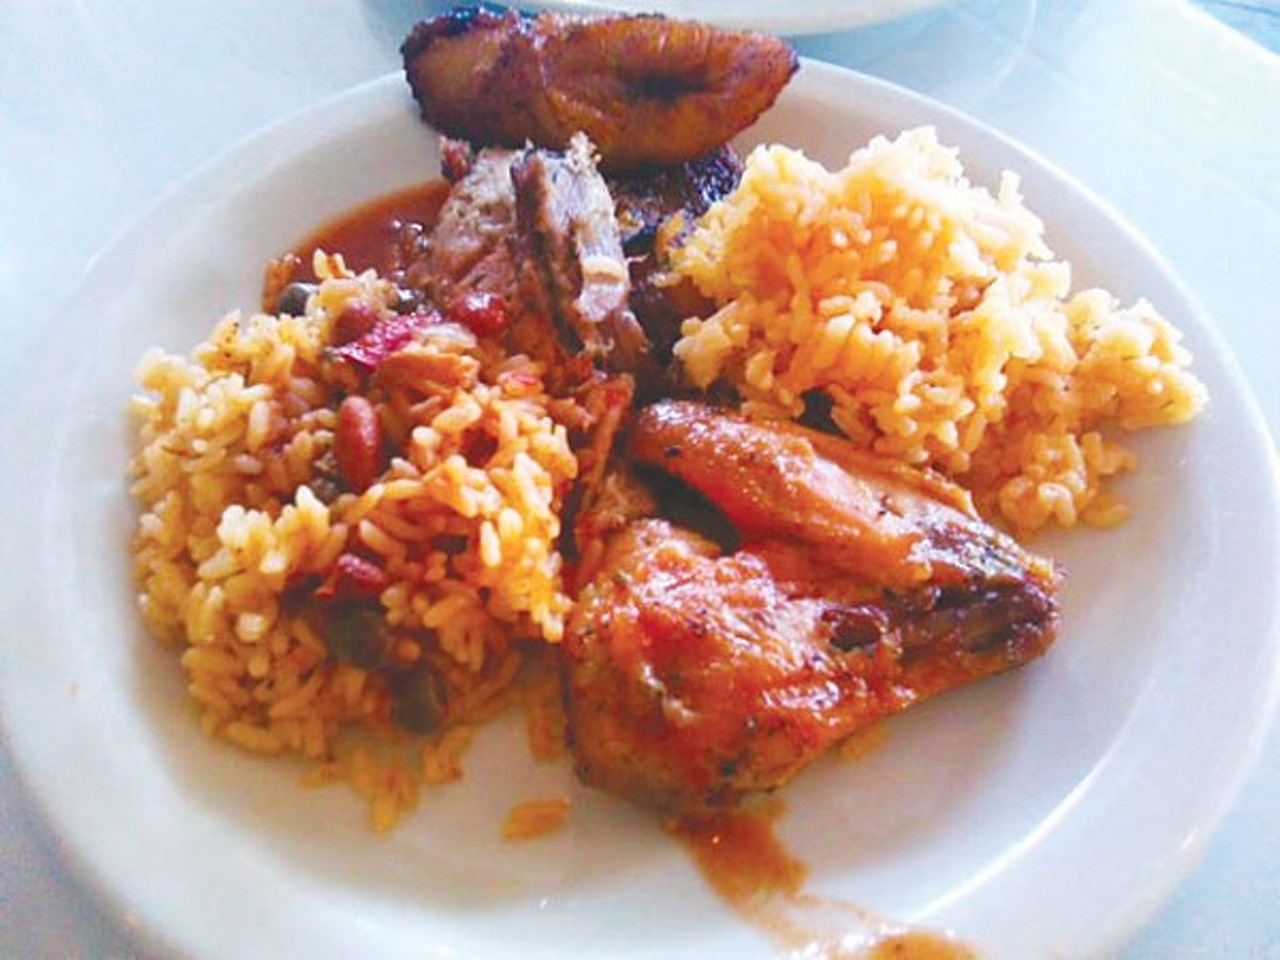  La Marginal
2447 Nacogdoches Road, (210) 804-2242 , 11am-8pm Sun-Thurs; 11am-11pm Fri-Sat
La Marginal is another one of San Antonio&#146;s Puerto Rican gems. Here you can try a little bit of everything as the food is served buffet style. A highlight of the menu is the pernil, or roast pork shoulder. And don&#146;t be fooled by the skimpy rice portions, because its flavor is spot on with what one would expect from genuine Puerto Rican rice. Photo via SA Current, Sophia Feliciano